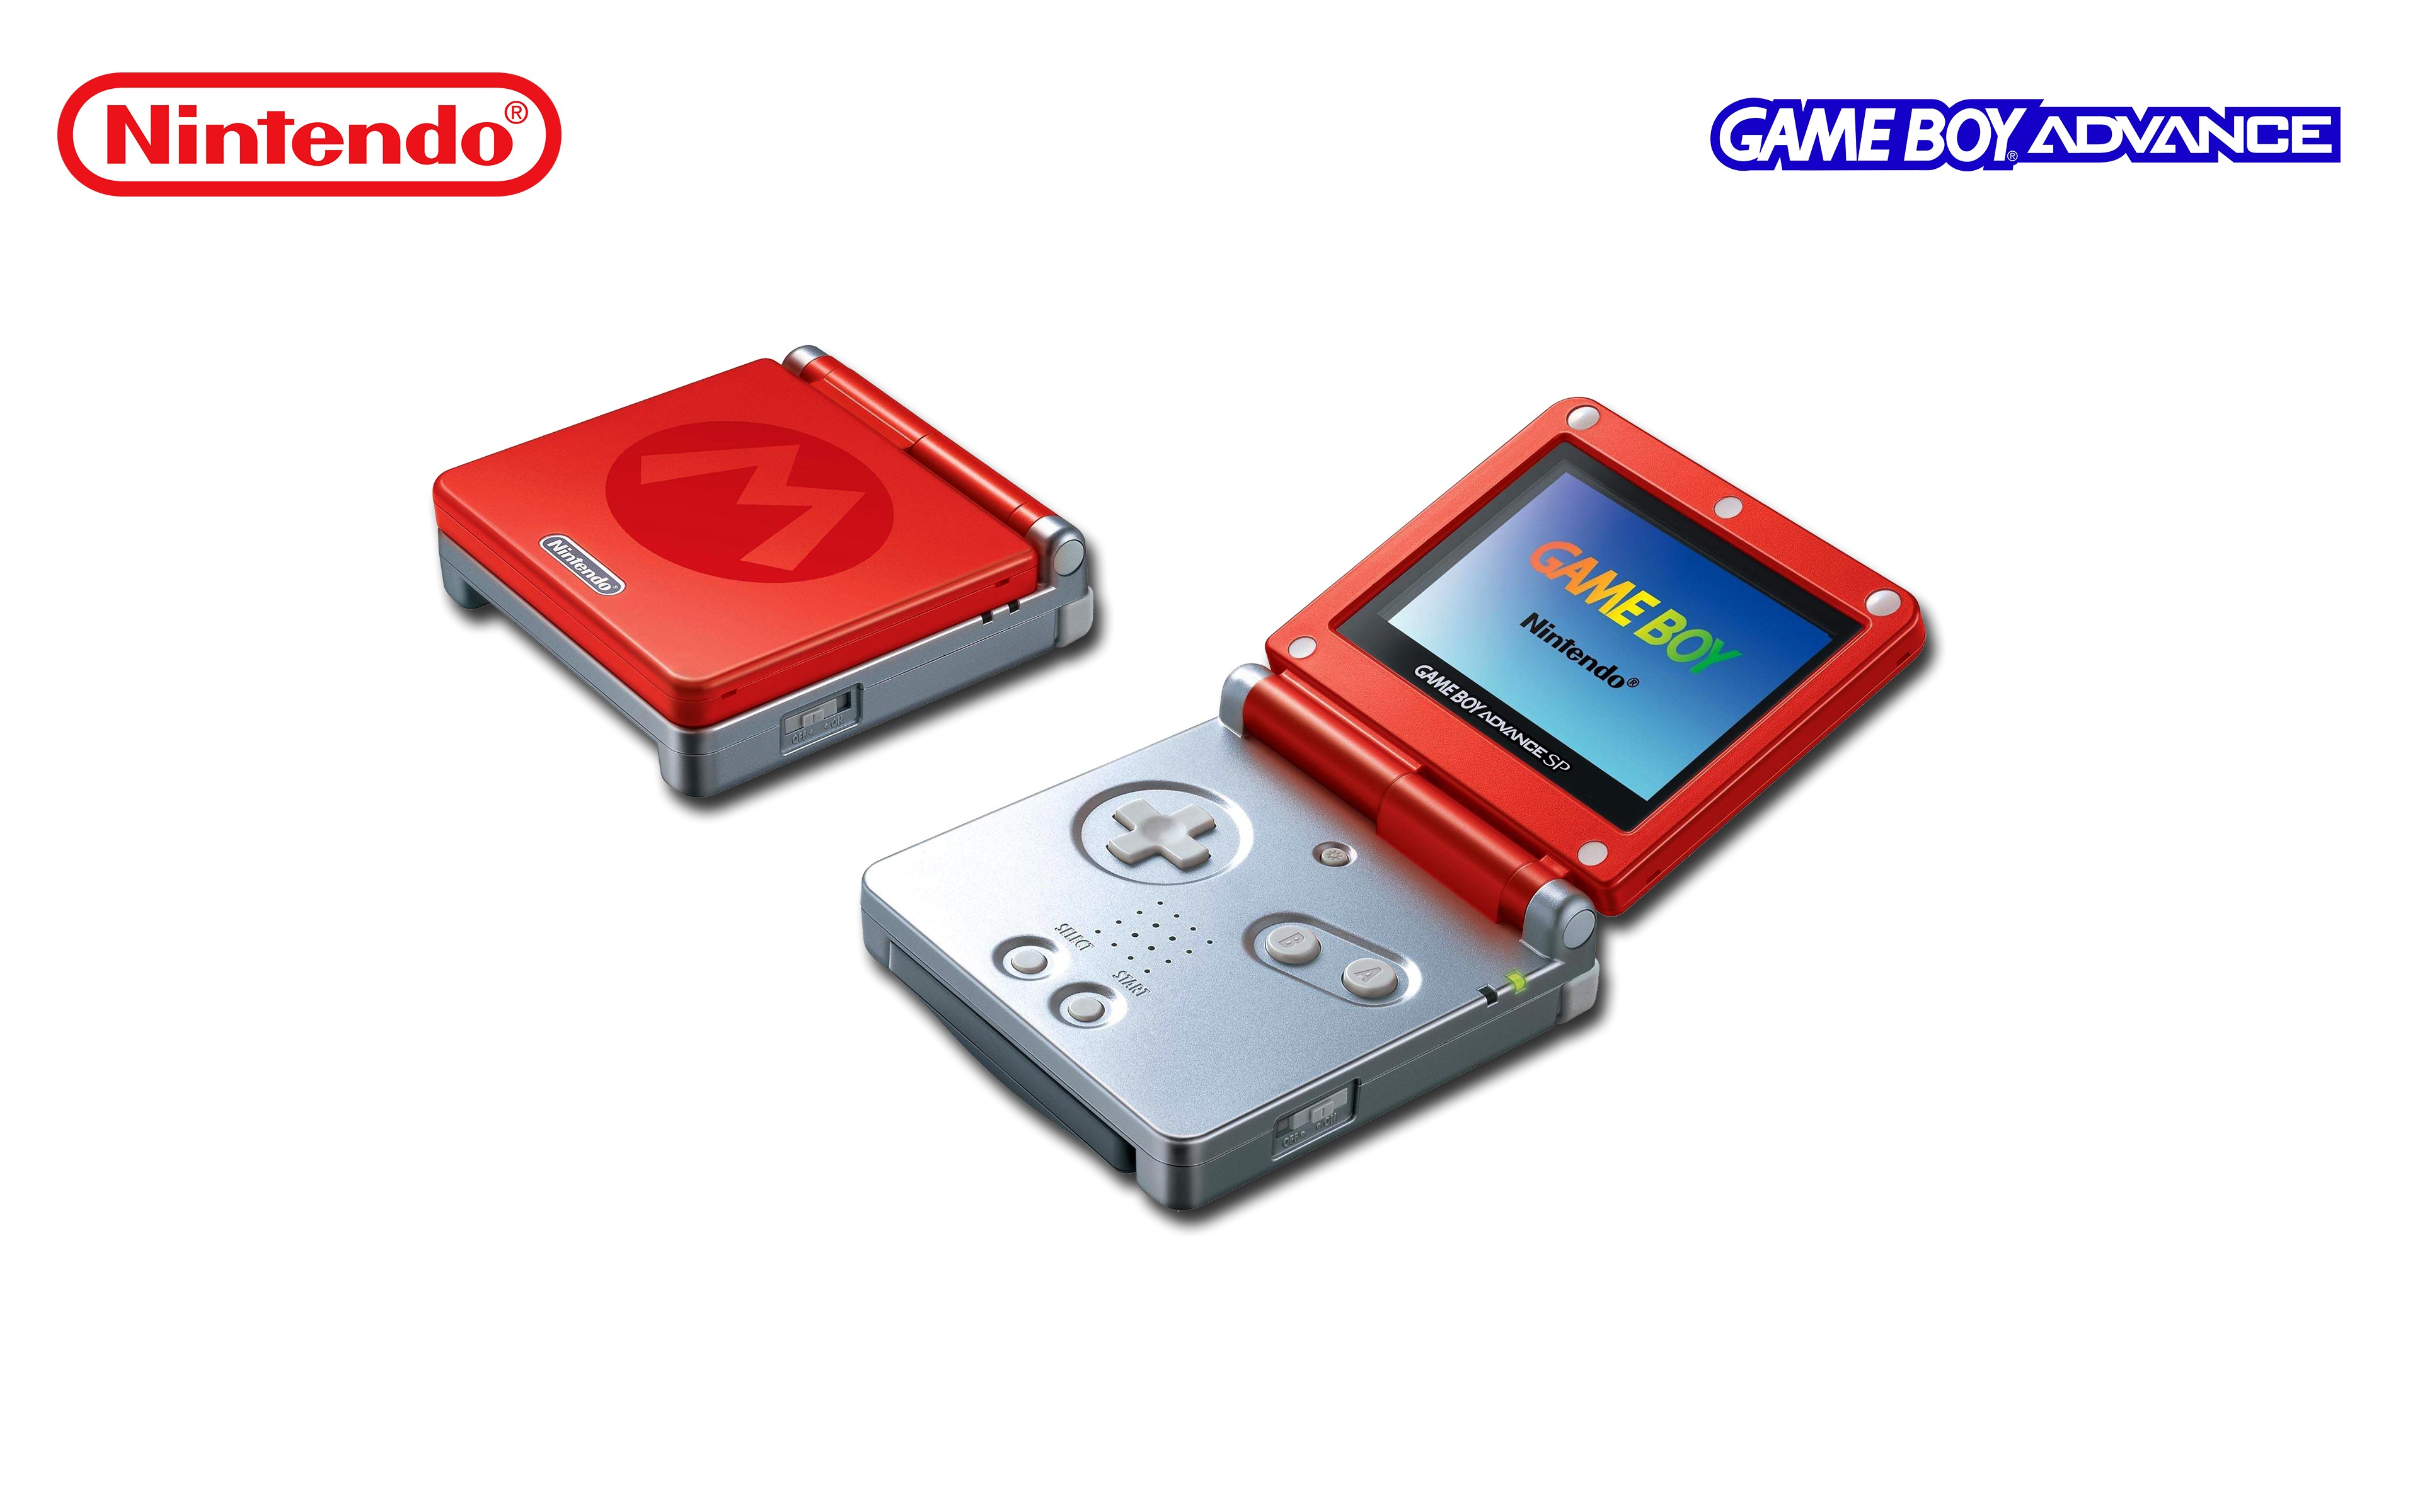 GameBoy Advance SP, Consoles, Nintendo, Video Games, Simple Background Wallpaper